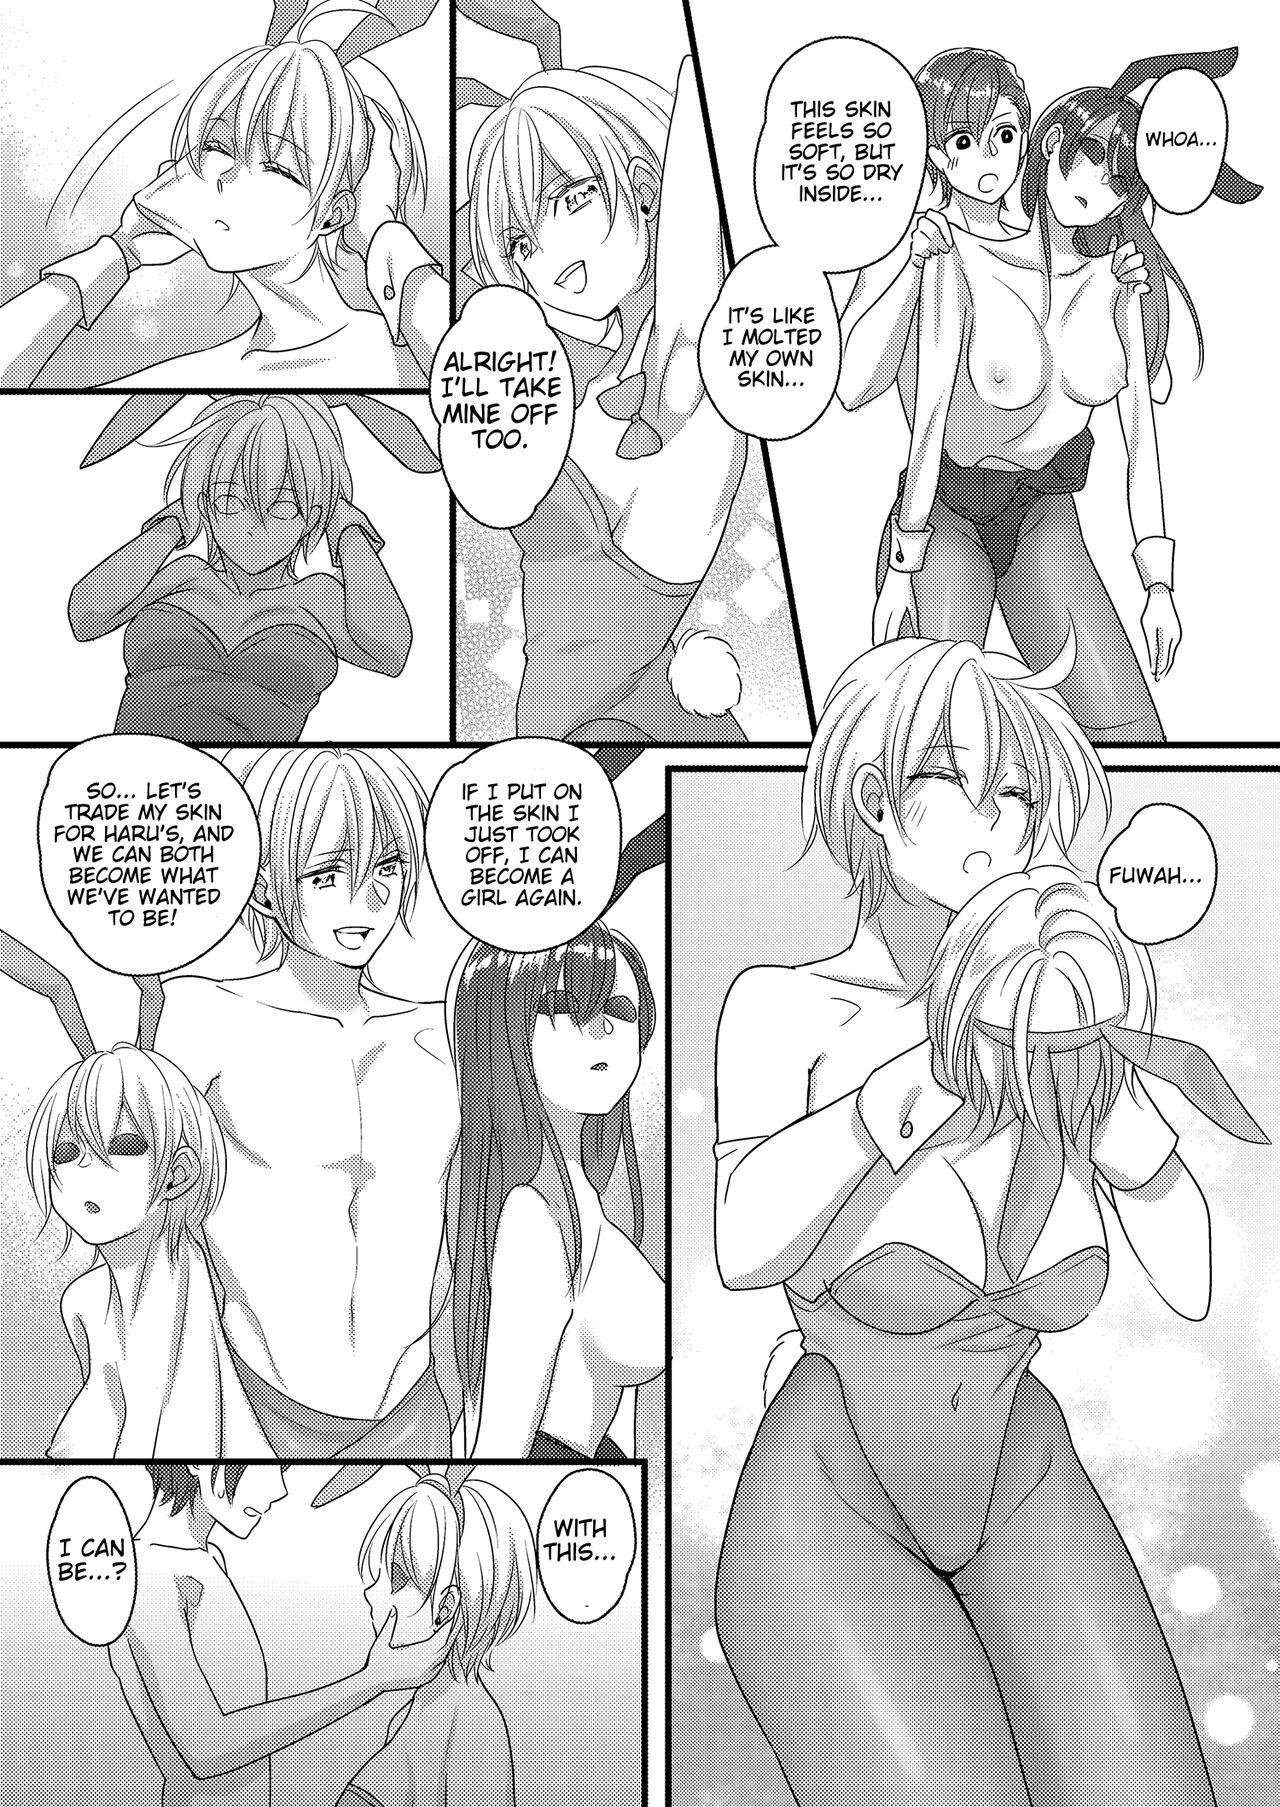 Wet Pussy Haru and Sana ～Love Connected Through Cosplay～ - Original Parody - Page 29